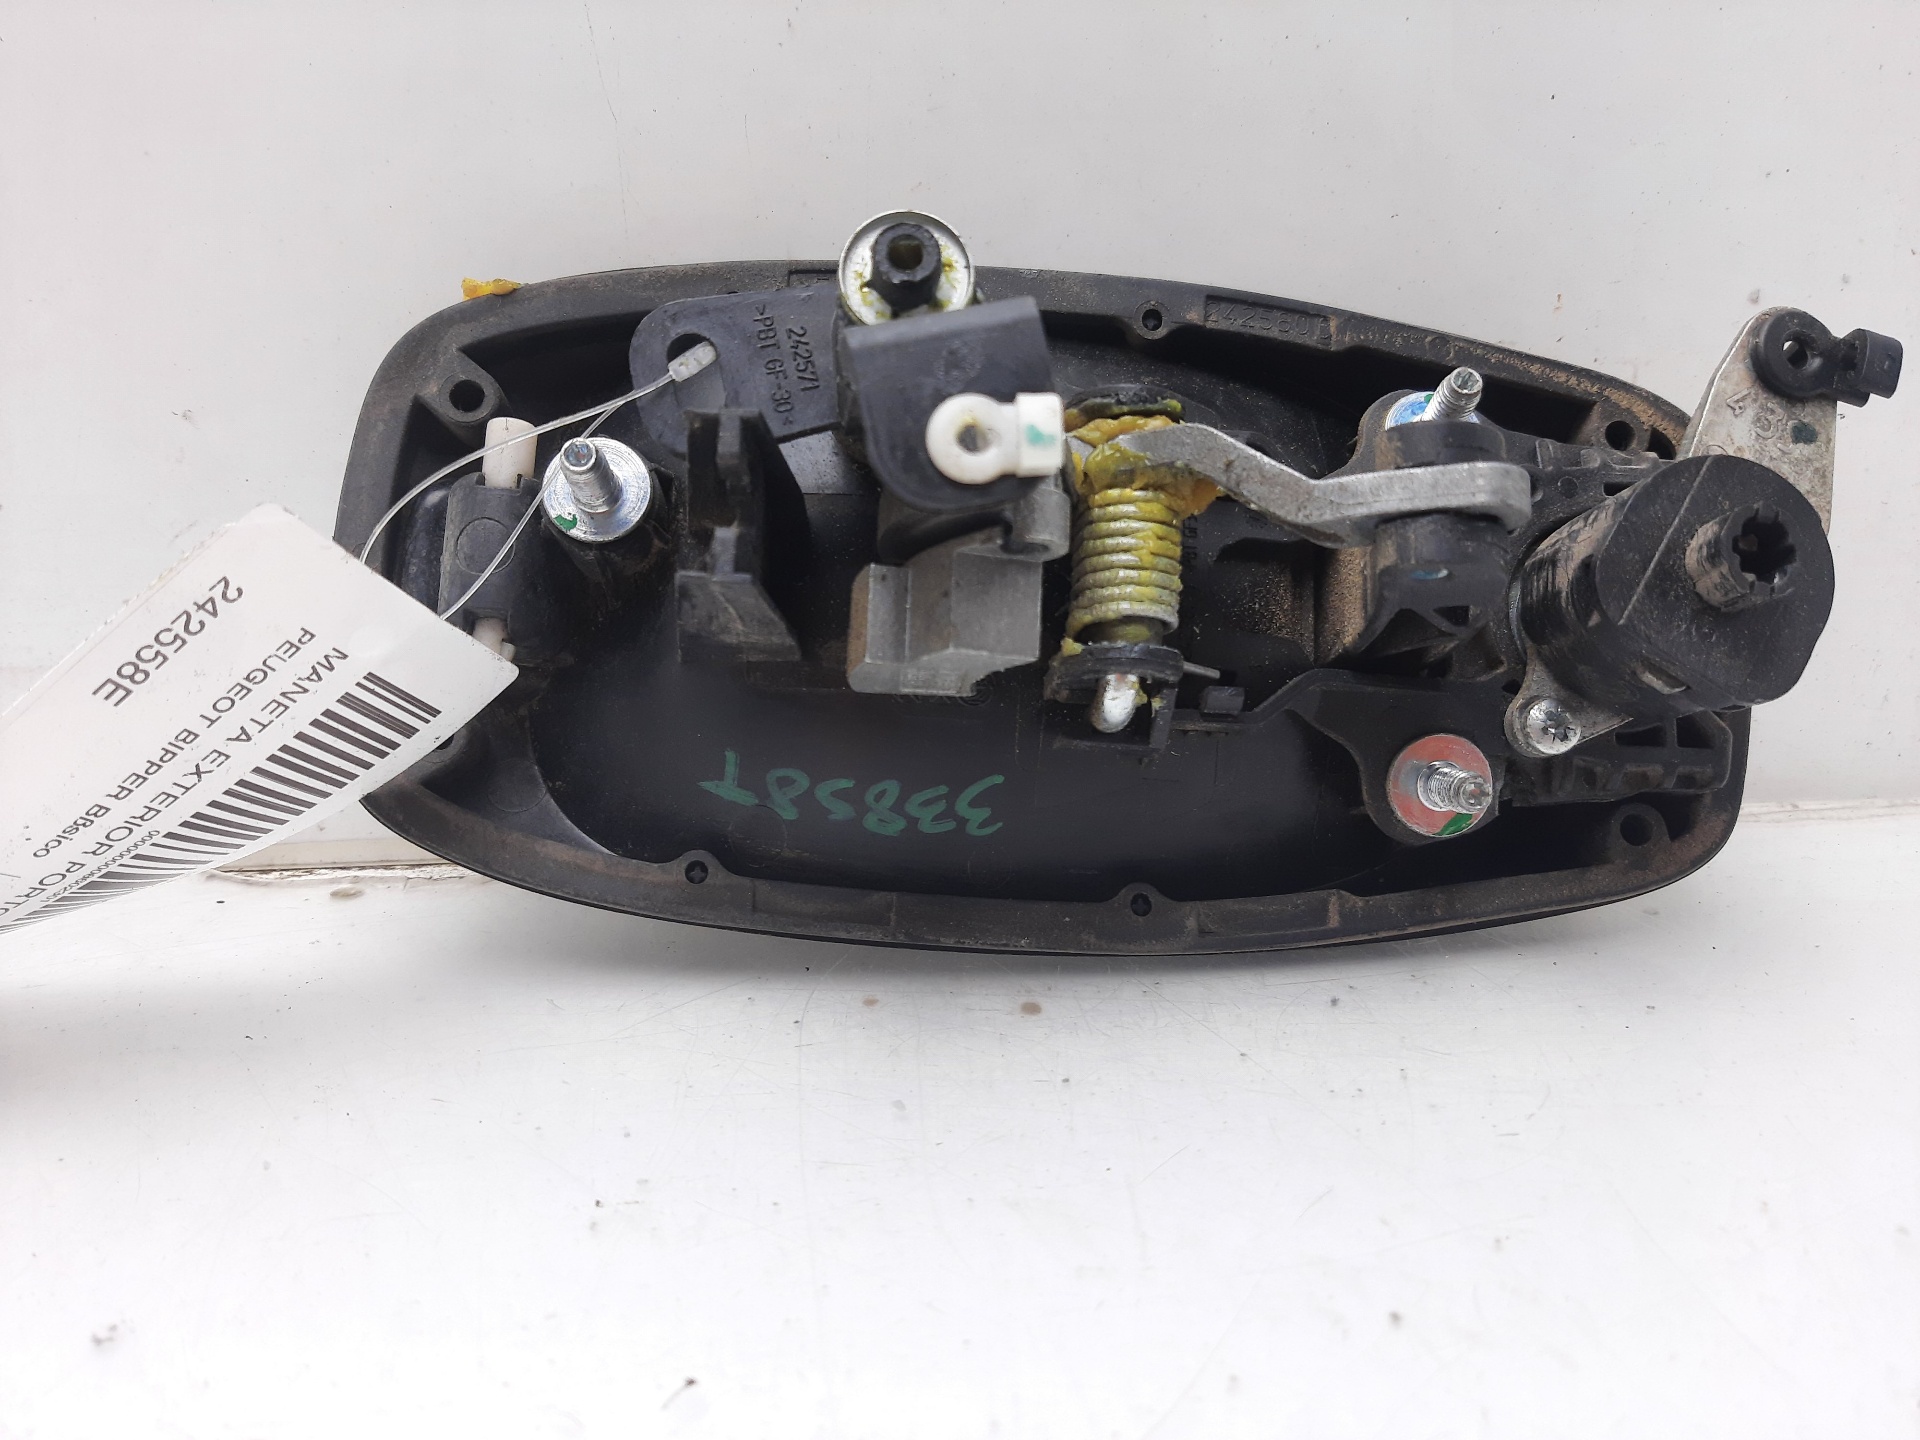 PEUGEOT Bipper 1 generation (2008-2020) Other Body Parts 242558E 23773412